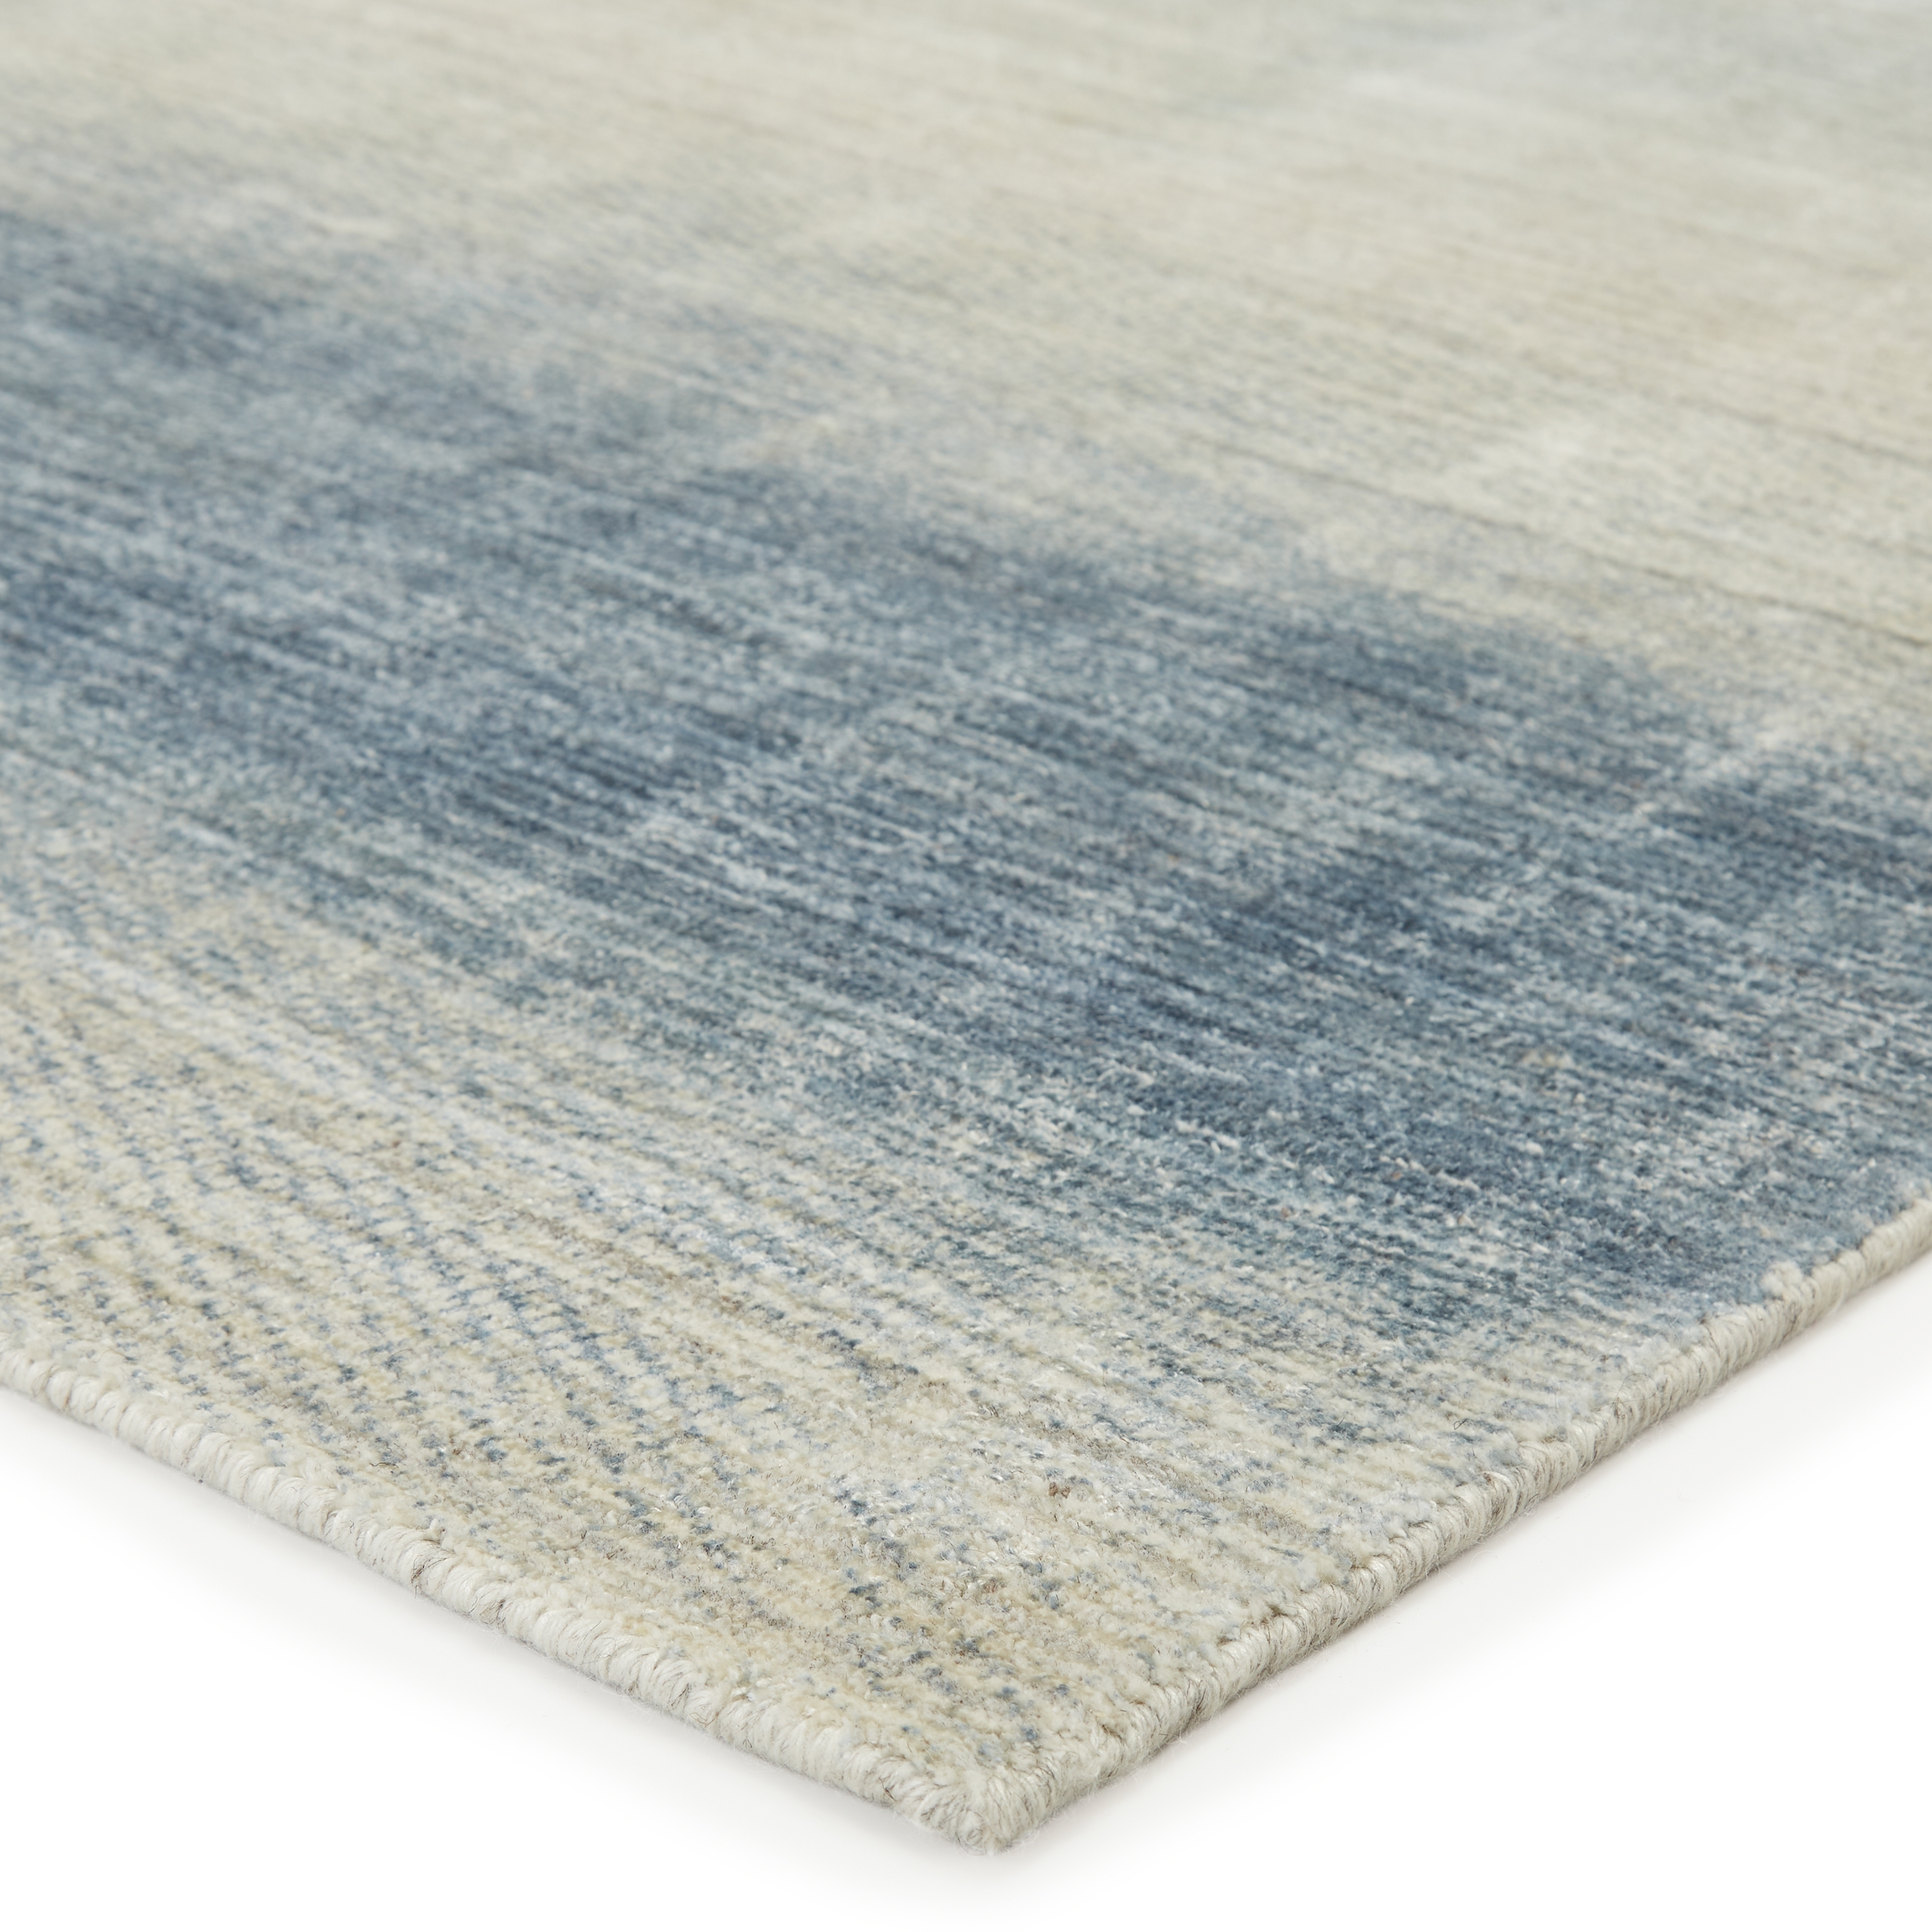 Barclay Butera by Bayshores Handmade Ombre Blue/ Beige Area Rug  (6'X9') - Image 1